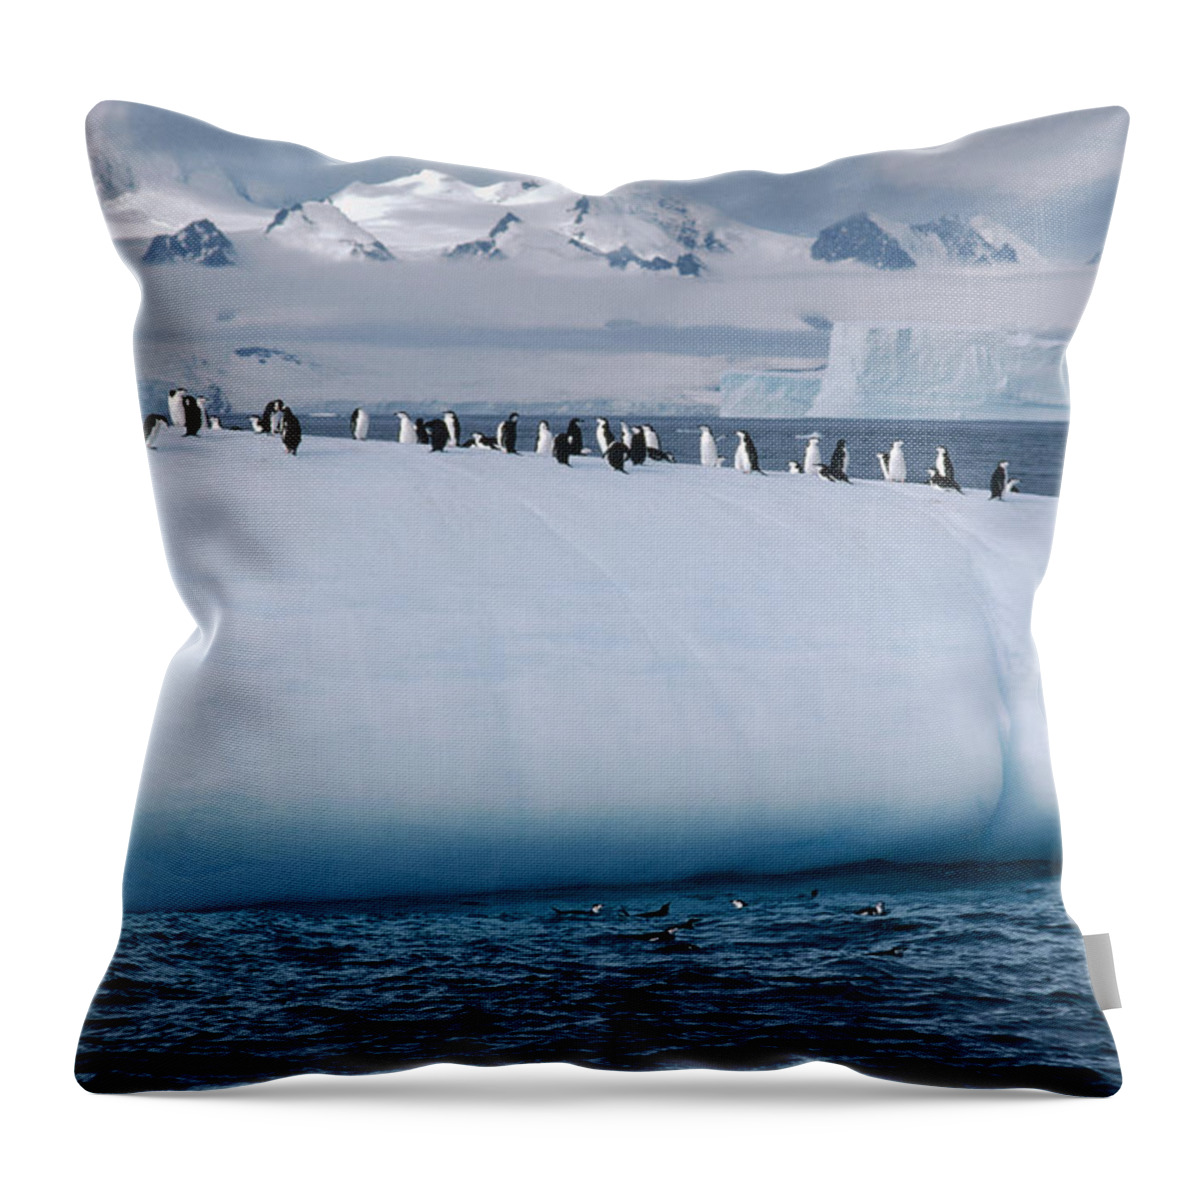 Feb0514 Throw Pillow featuring the photograph Chinstrap Penguins On Iceberg #1 by Flip Nicklin